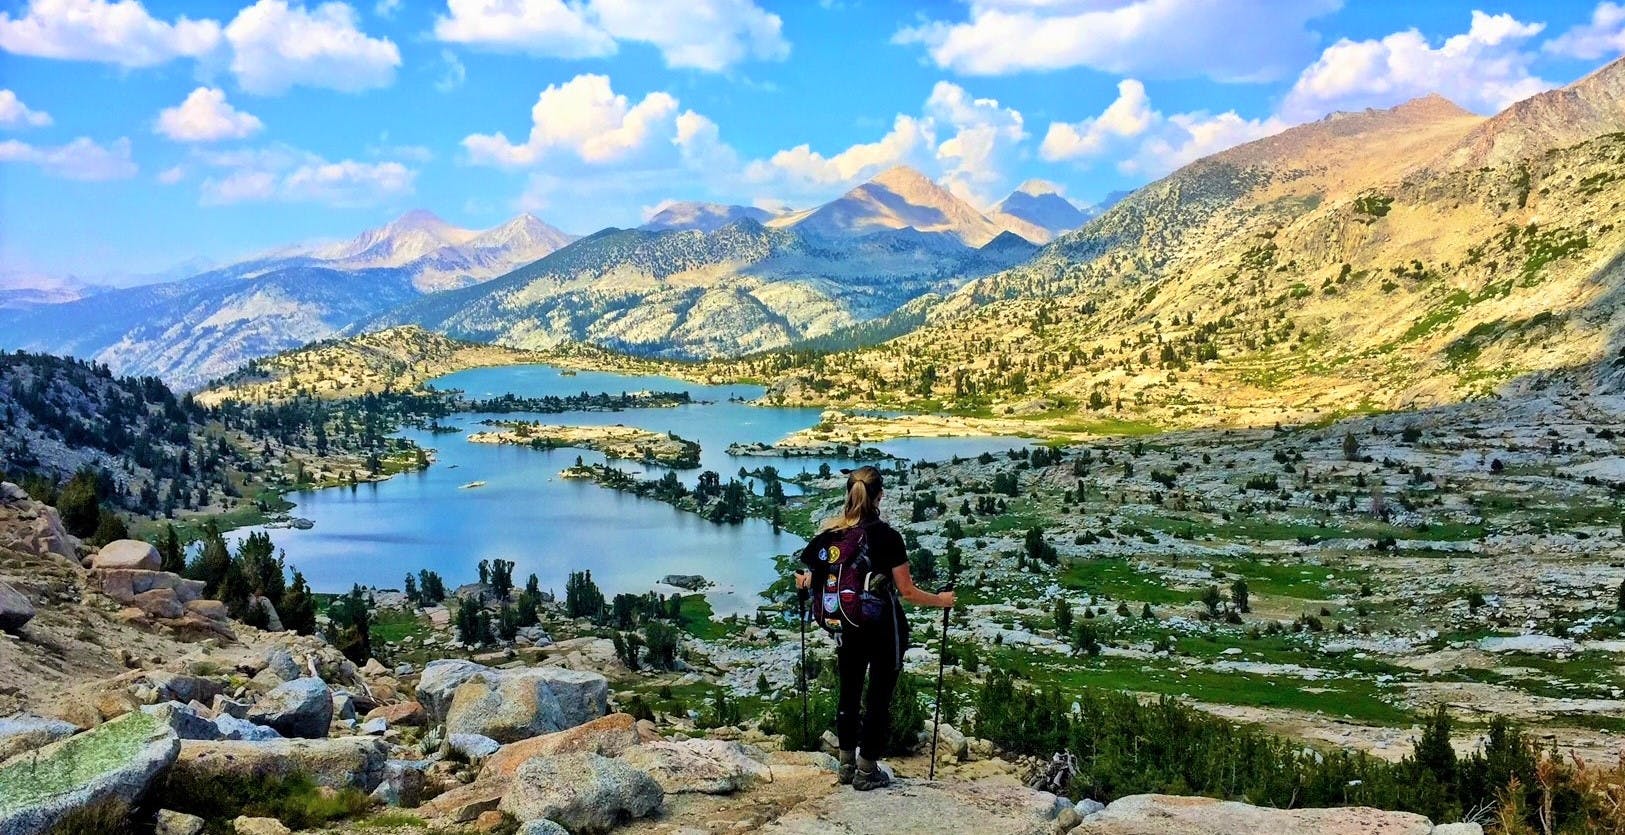 A woman hiking in the mountains near a lake.